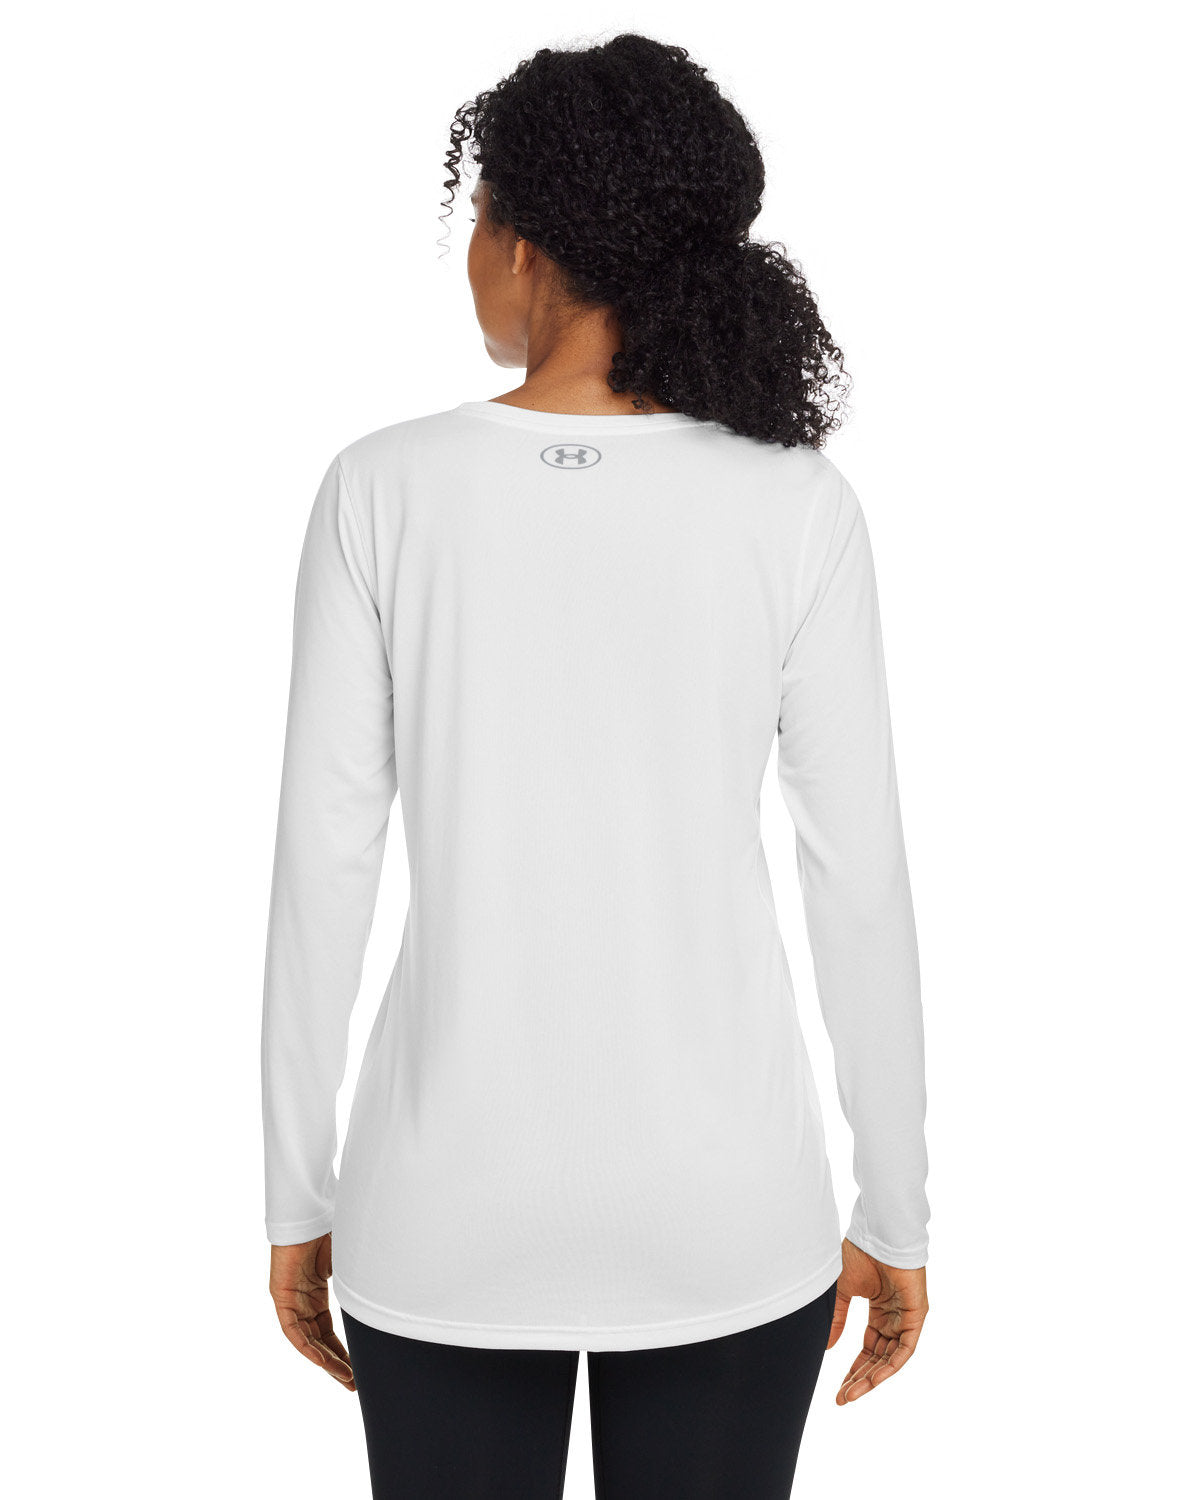 Under Armour Ladies Tech Long-Sleeve T-Shirt, White